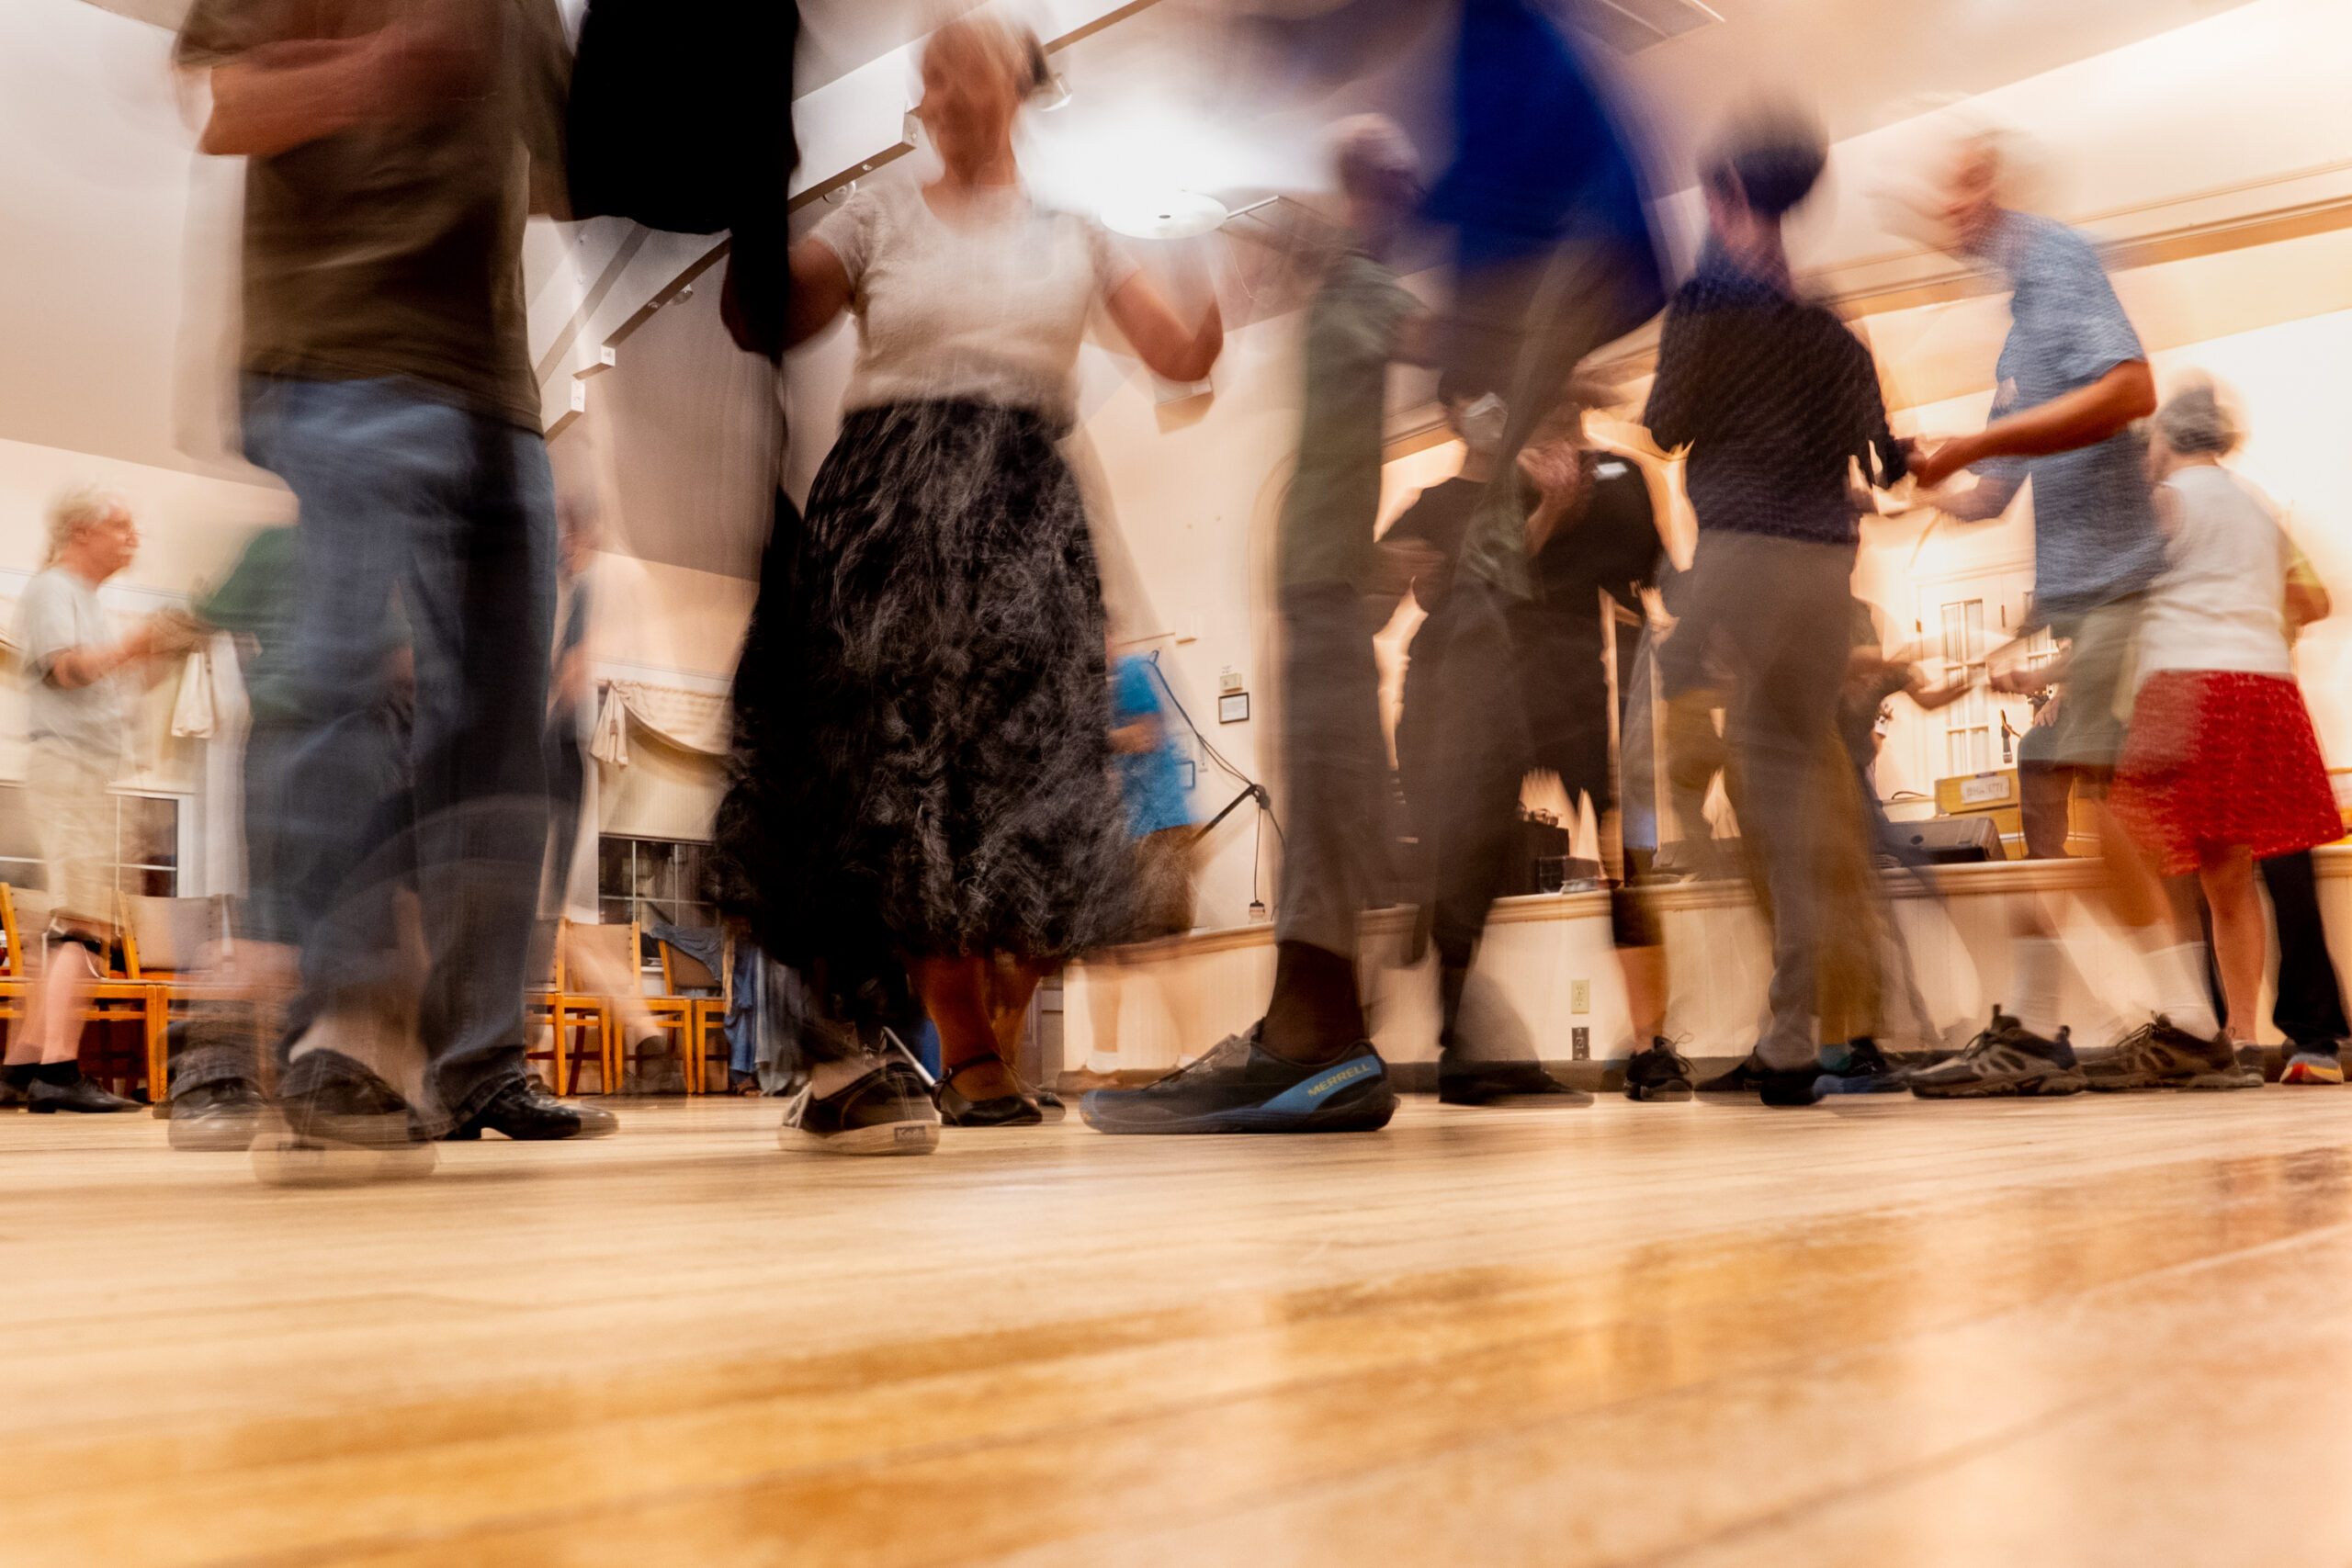 A slow shutter speed shows motion blur of people dancing in a hall.